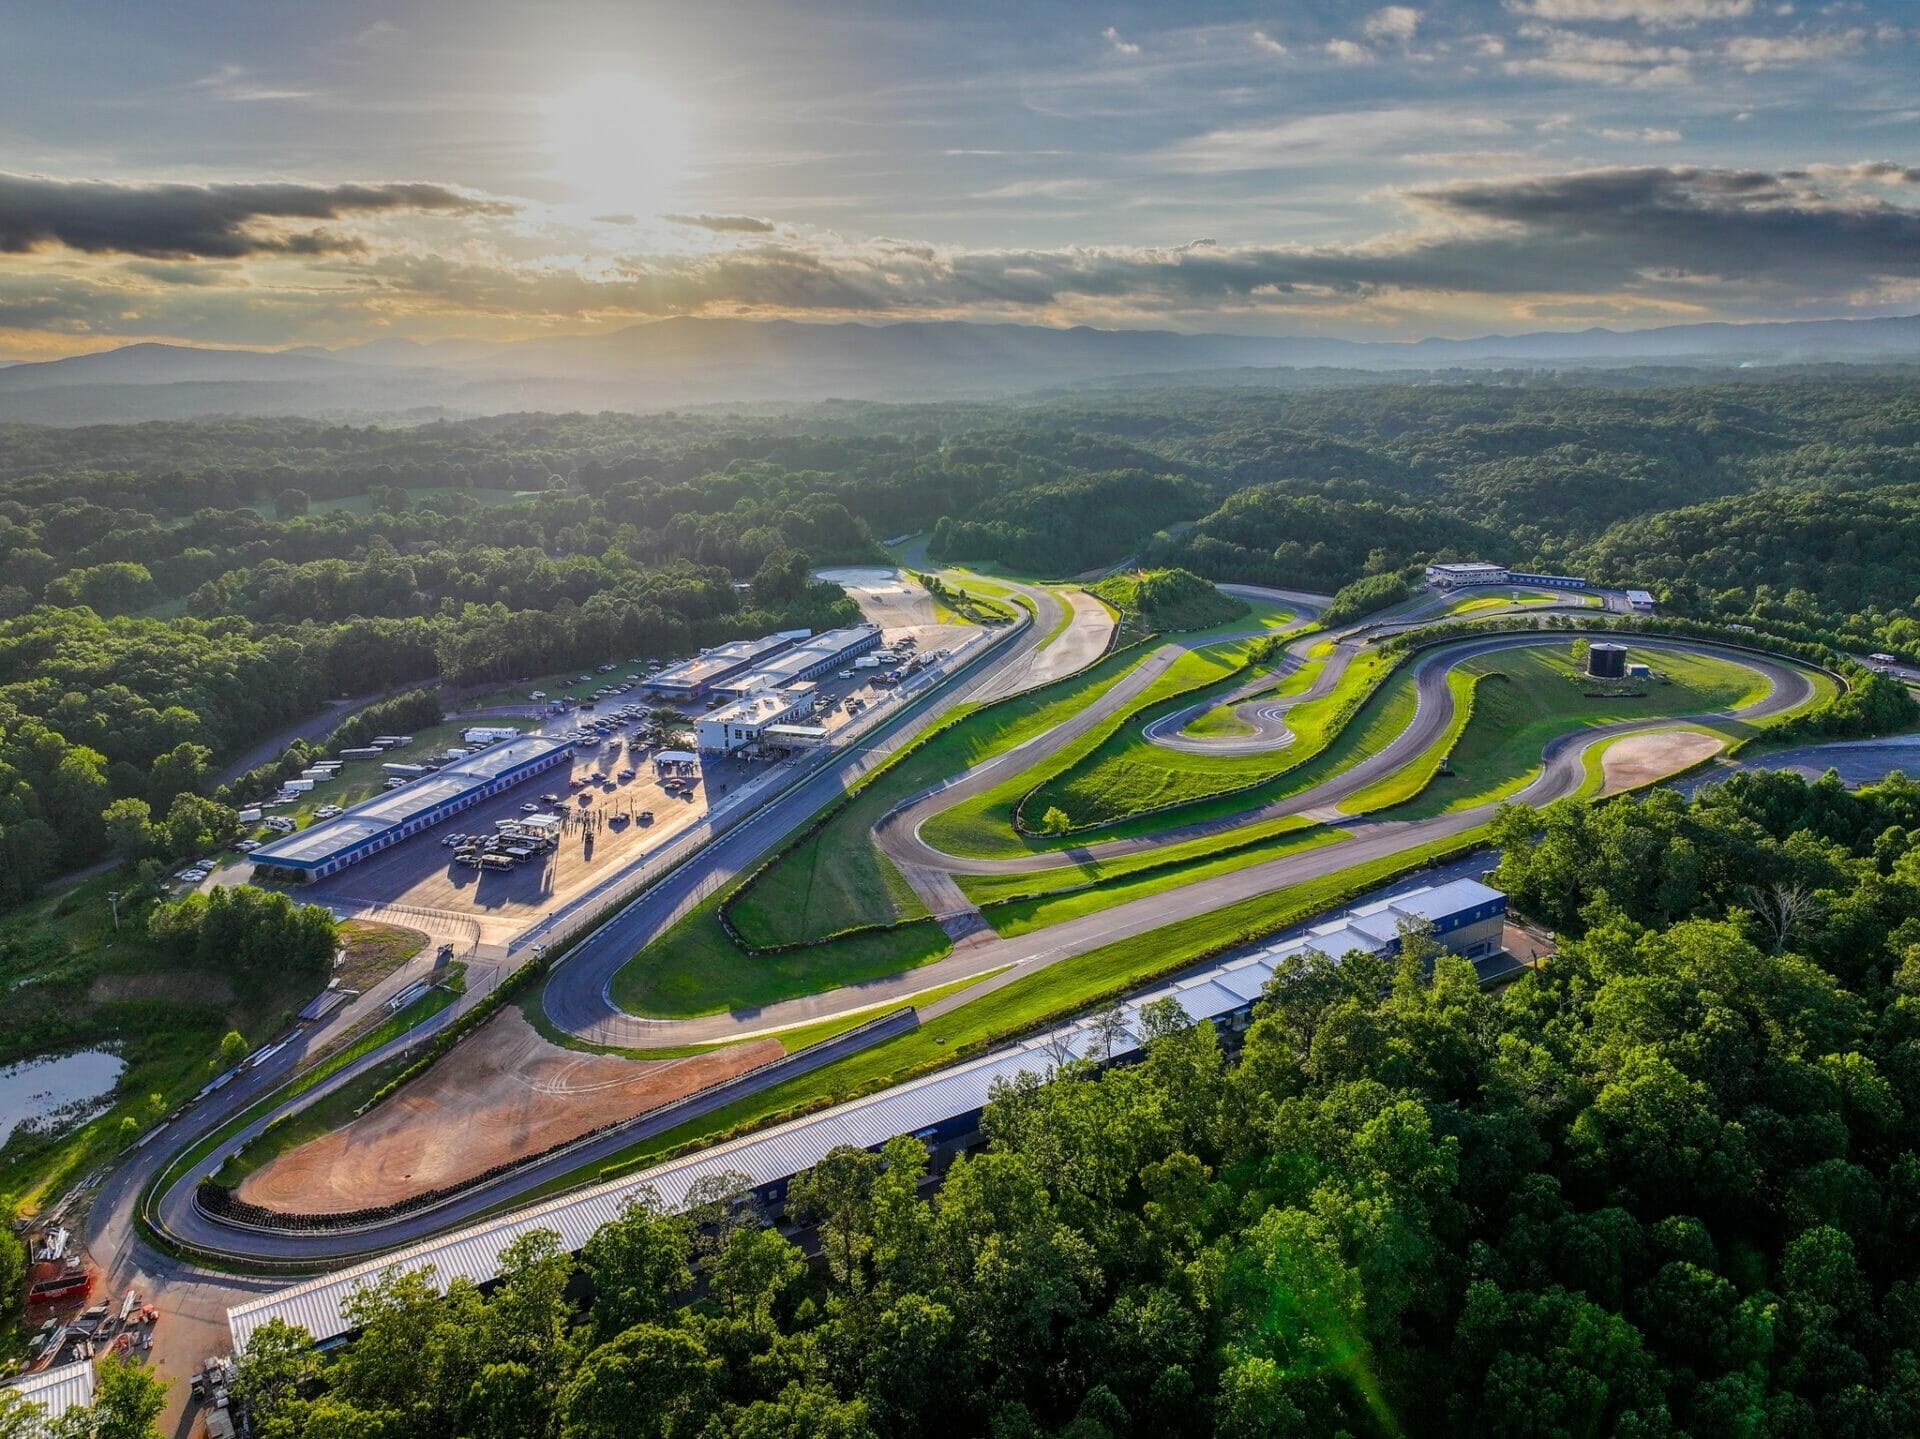 IMG 1478 1 - Atlanta Motorsports Park Accelerates into a Bright Future with Unprecedented Zoning Approvals